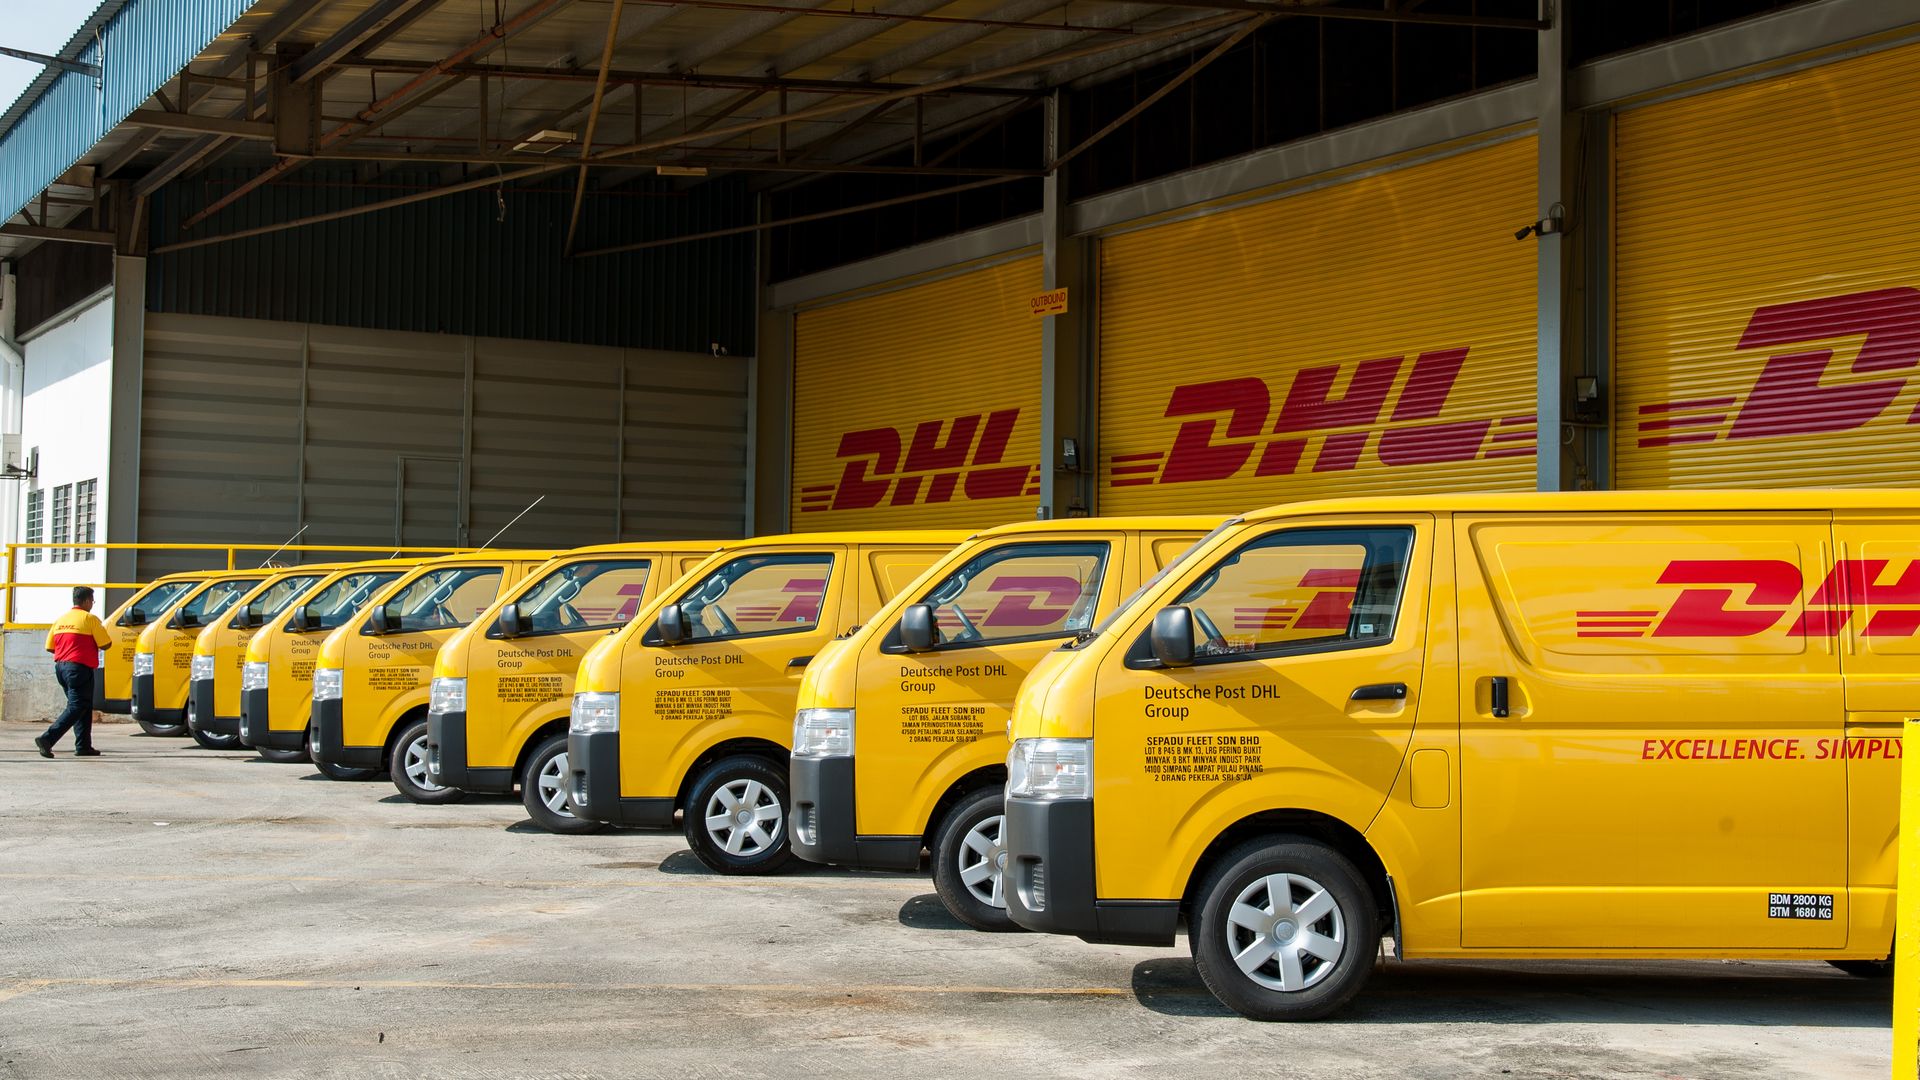 DHL delivery vans in Malaysia